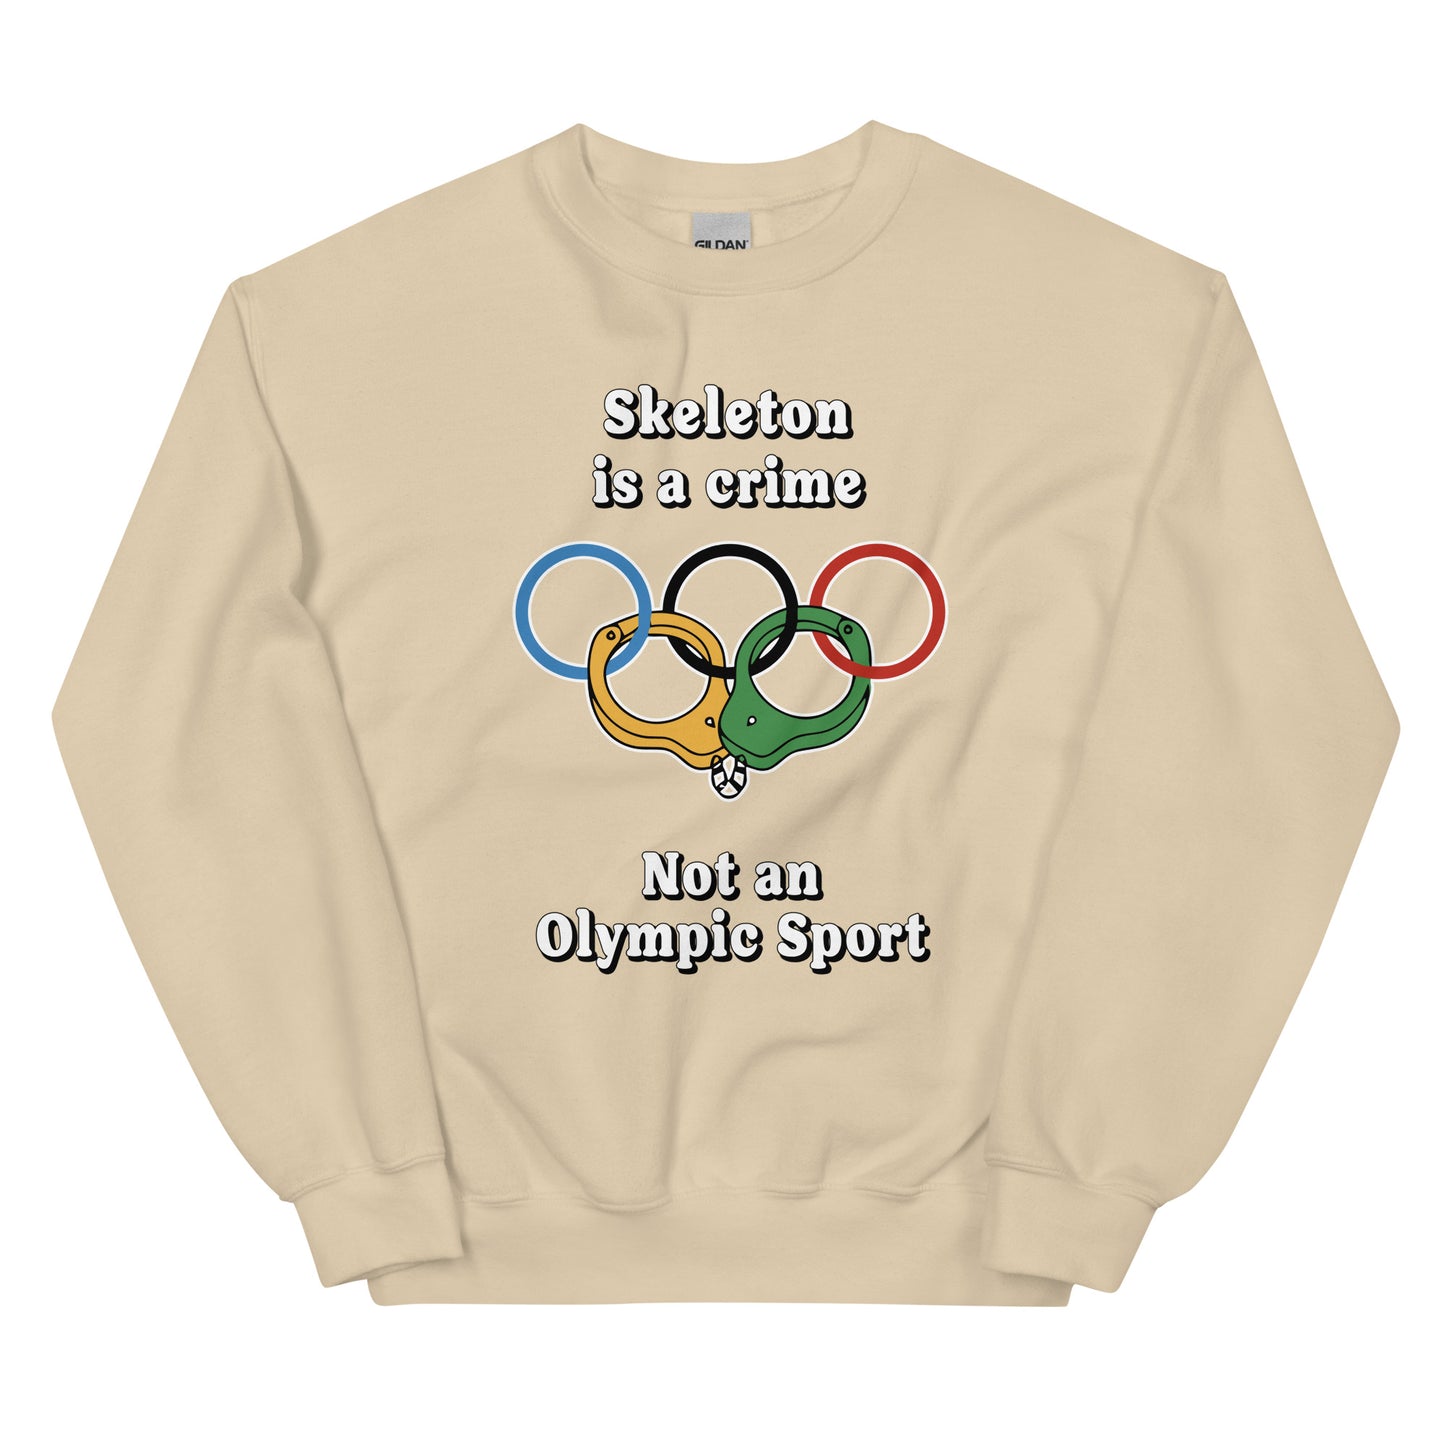 Skeleton is a crime not an olympic sport design printed on a crewneck sweatshirt by Whistler Shirts